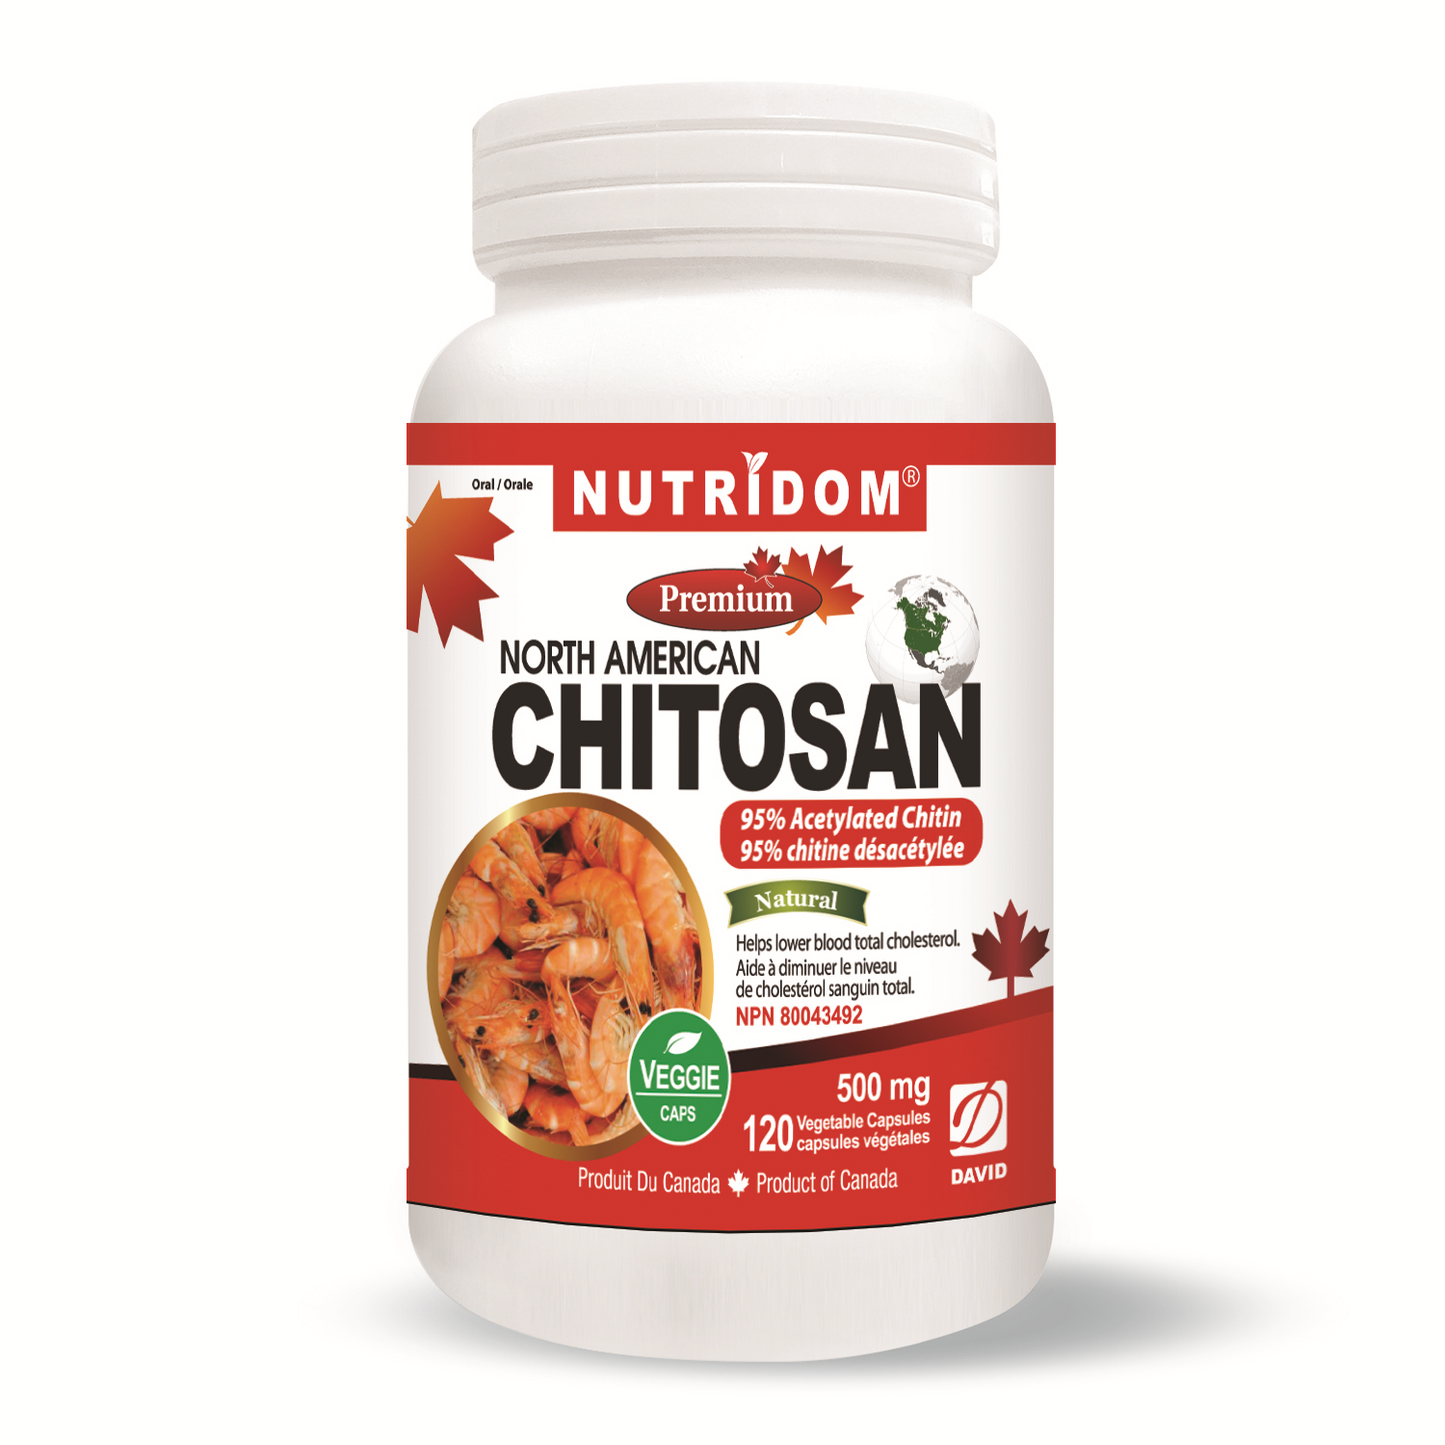 Nutridom Chitosan Extract 95% Acetylated Chitin (120 Veggie Capsules)